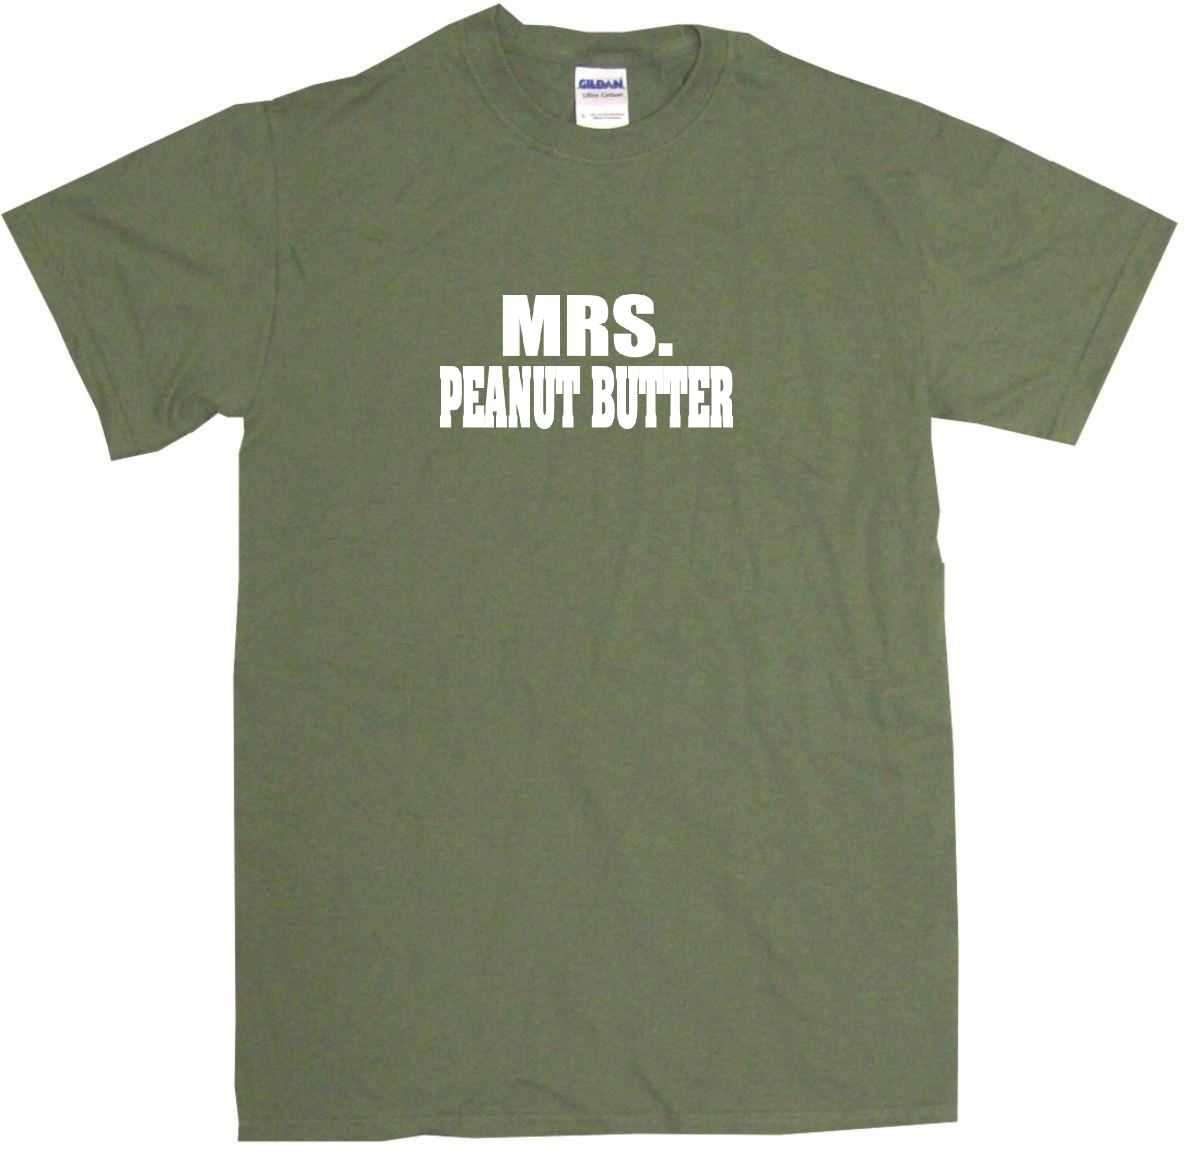 I Heart Love Peanut Butter Mens Tee Shirt Pick Size Color Small 6XL S/S L/S